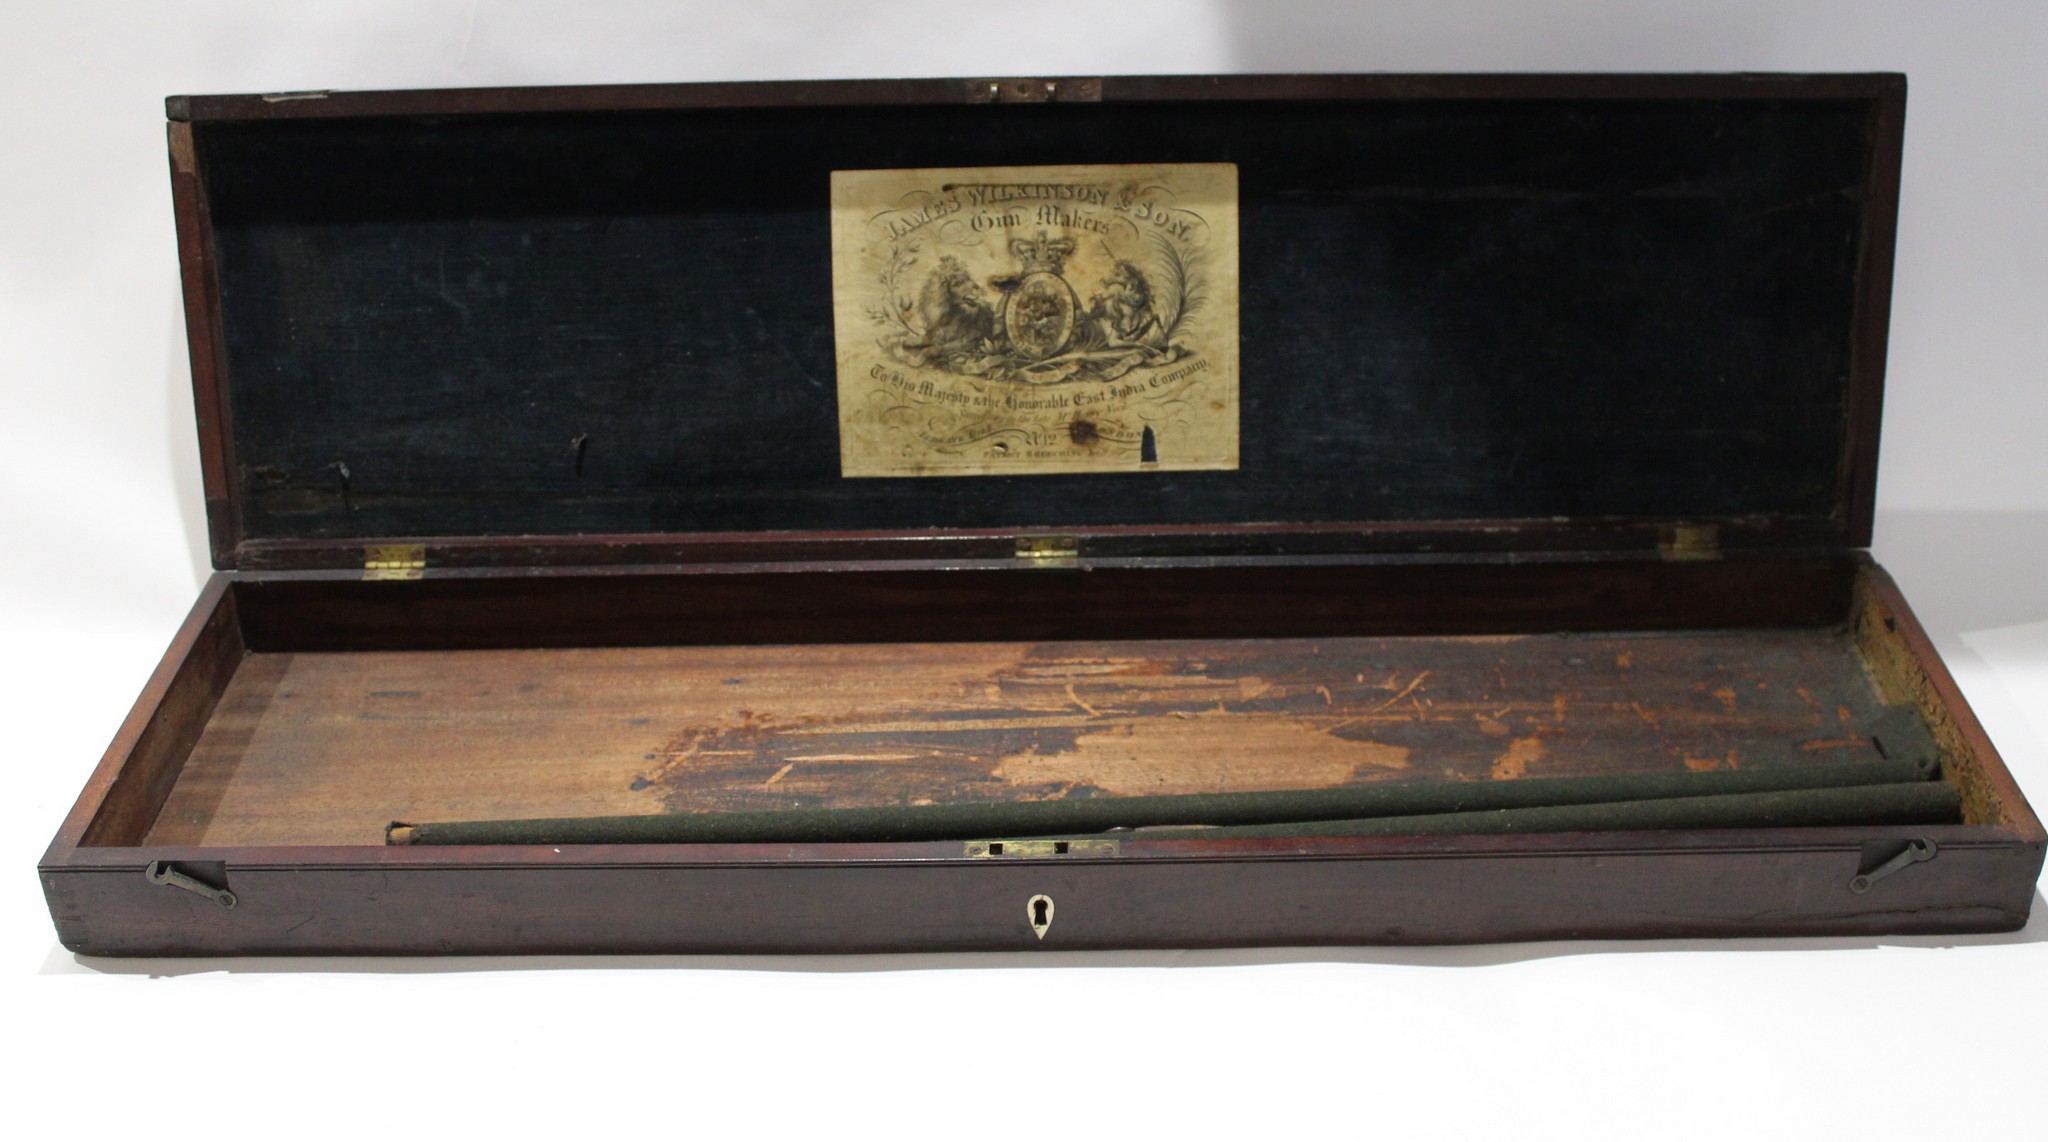 19th century mahogany gun case, plush lined lid applied with label for James Wilksinson, Gunmakers